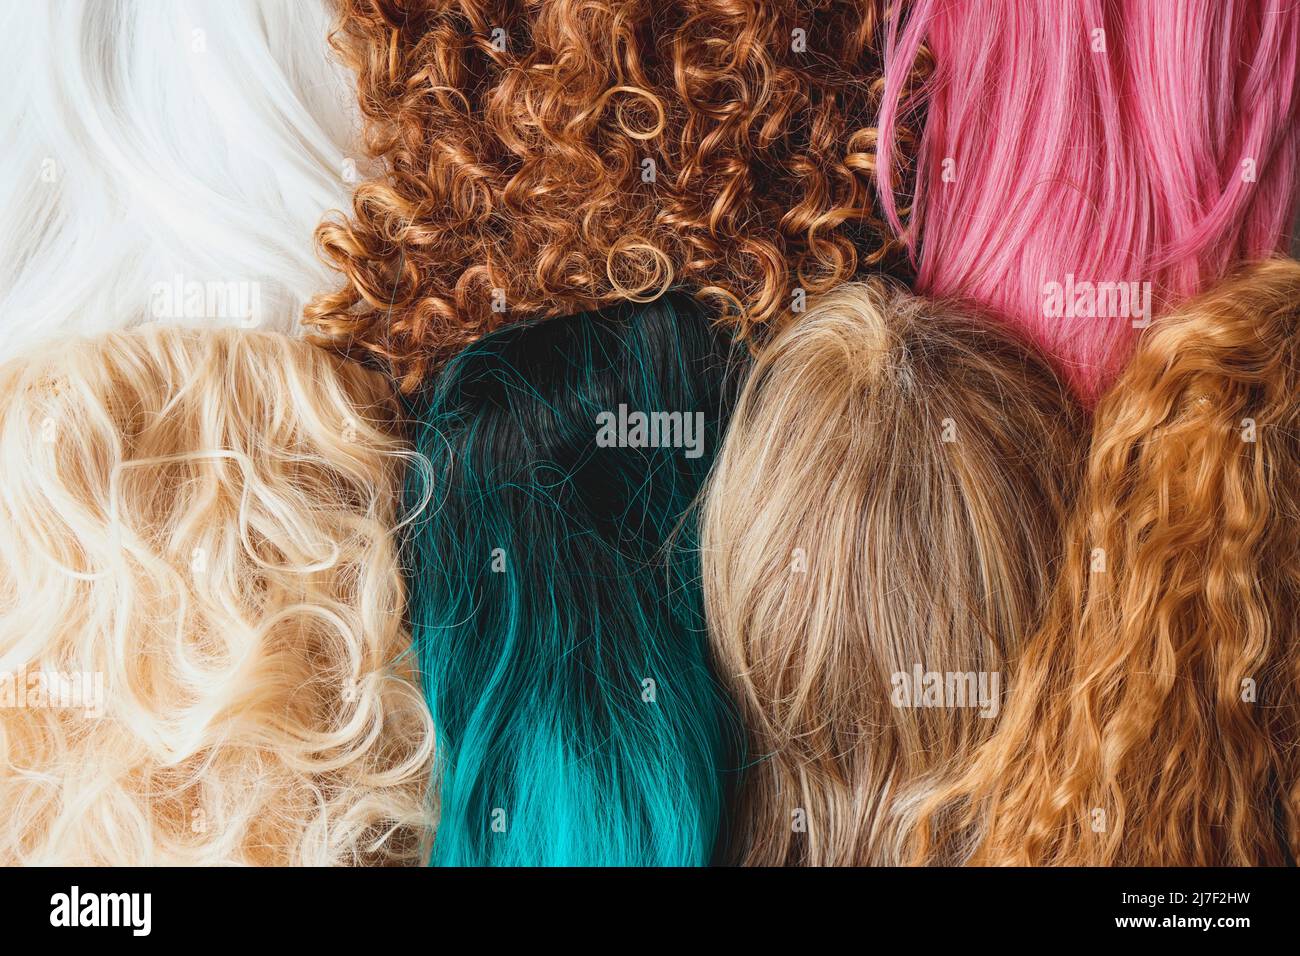 Image of assorted wigs of different styles and colors included dyed, curly and natural hair styles Stock Photo